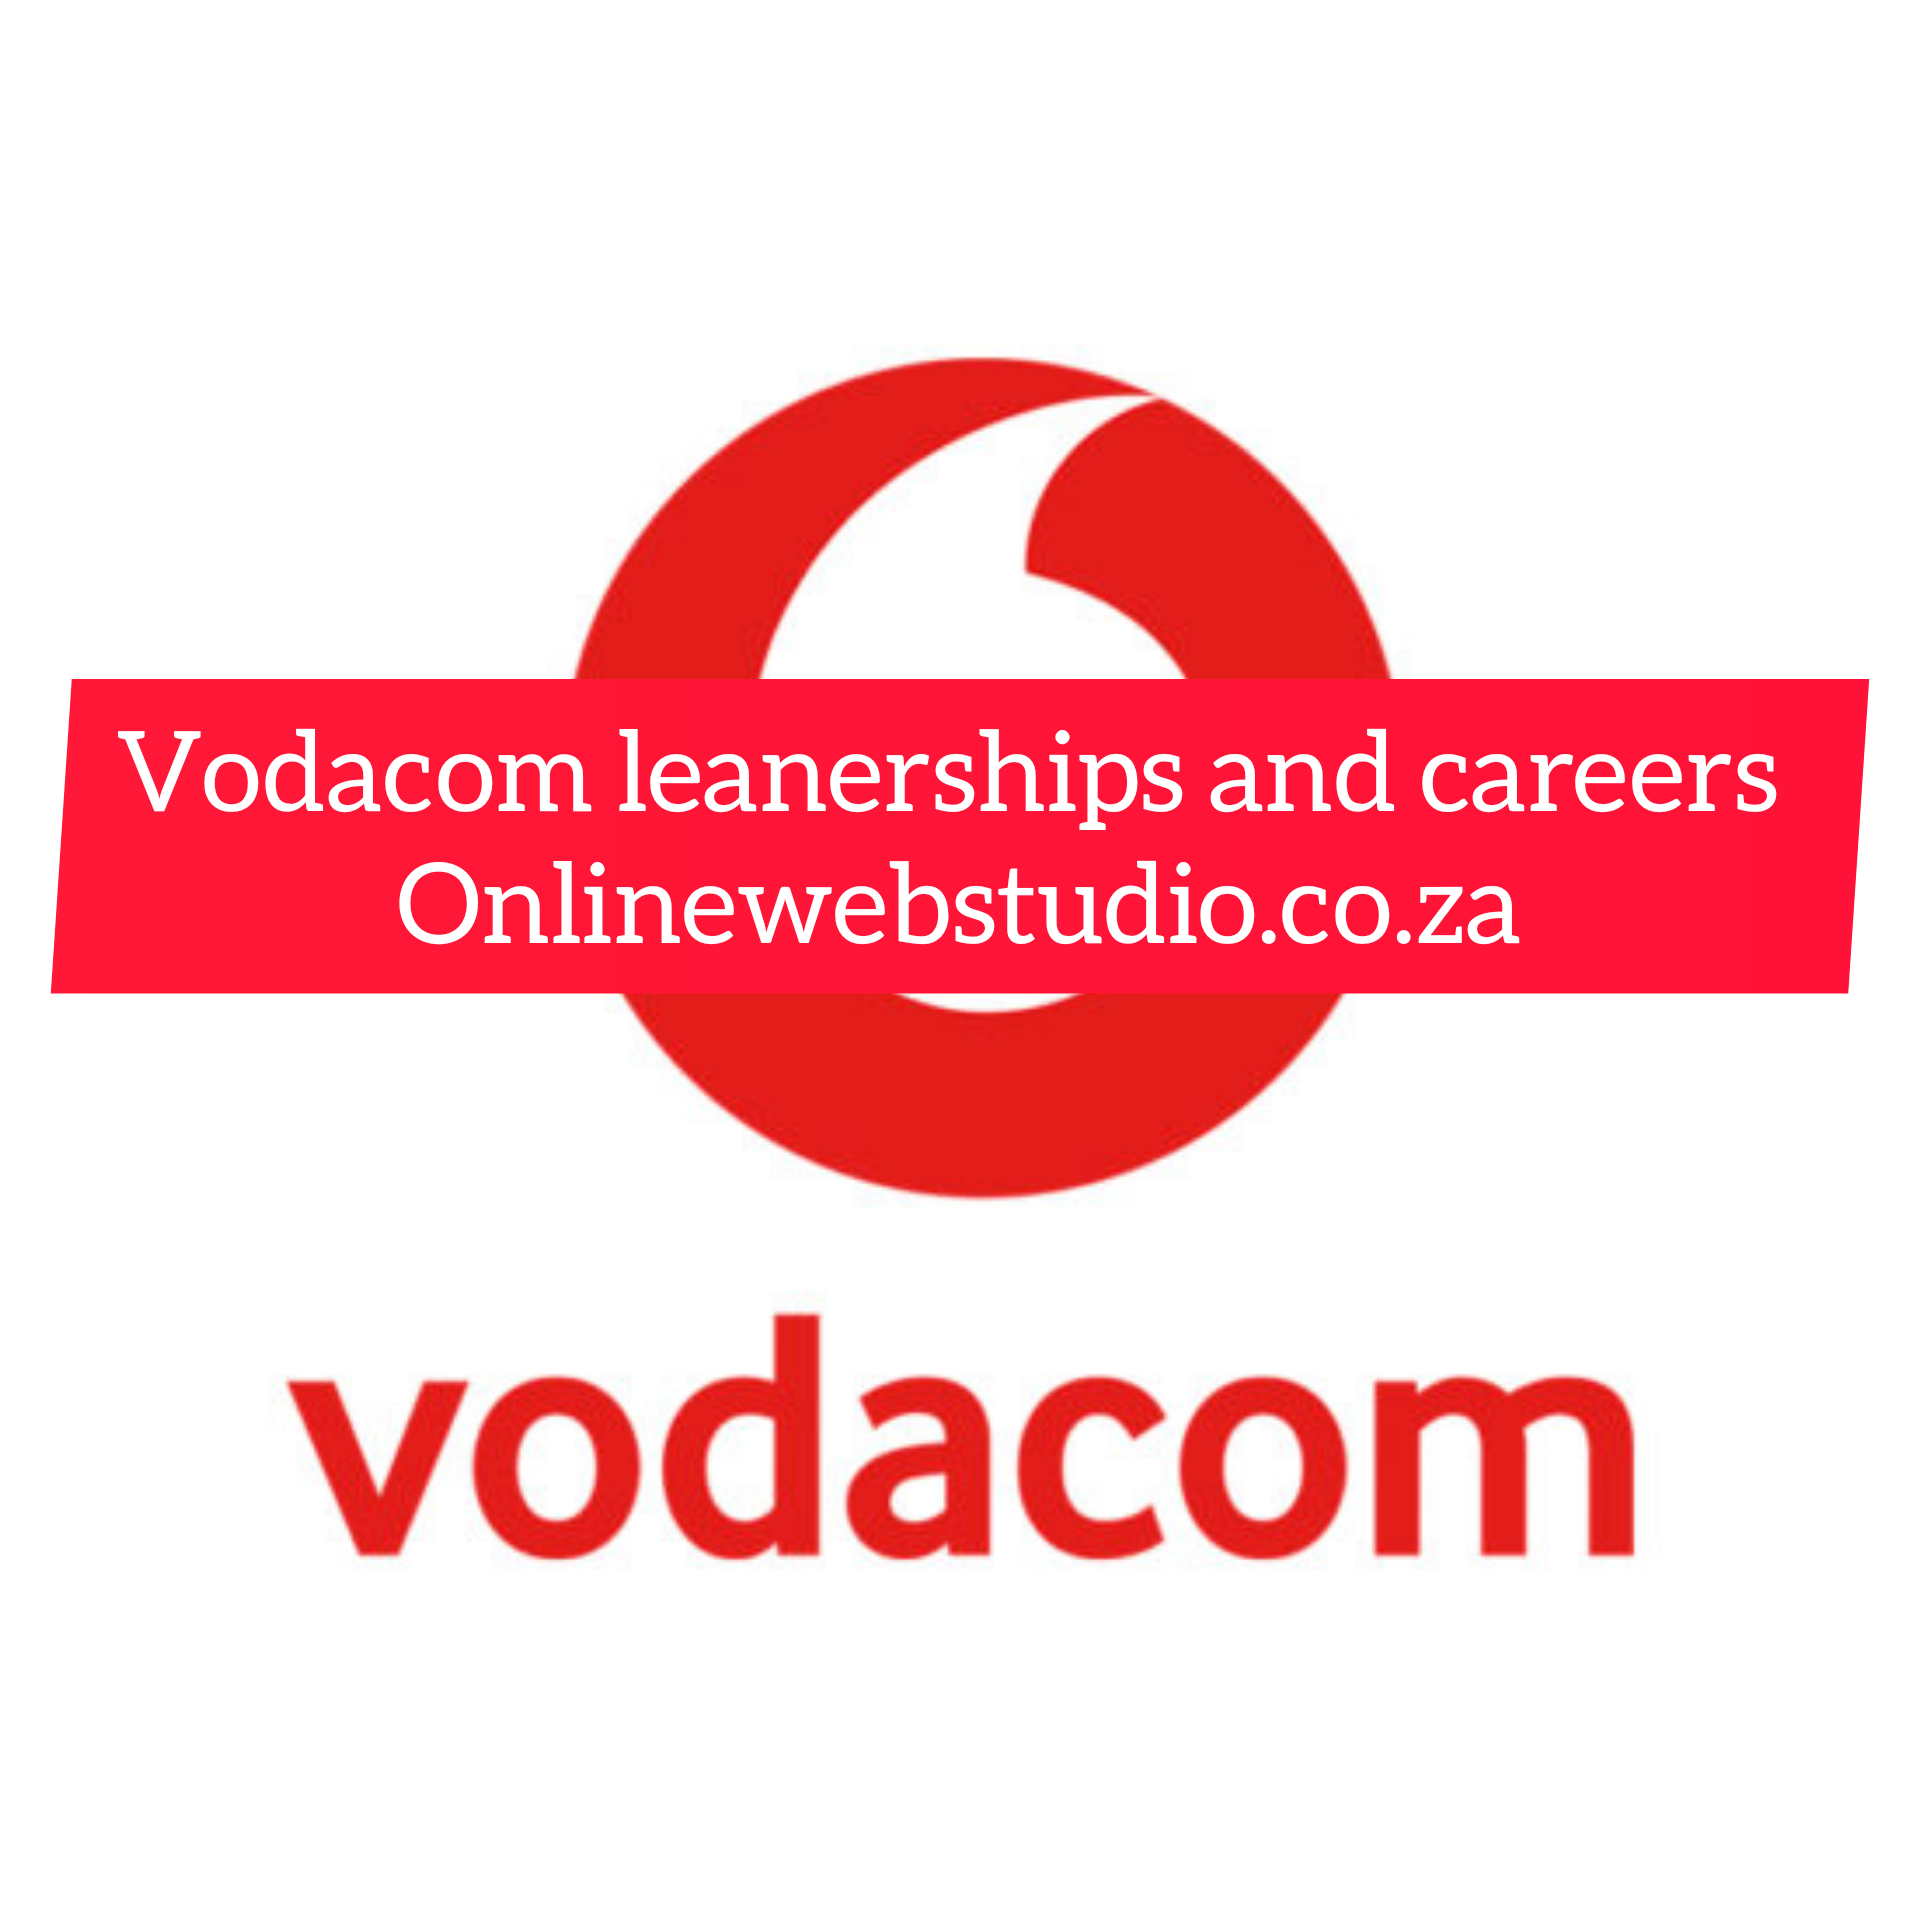 VODACOM LEANERSHIPS AND CAREERS